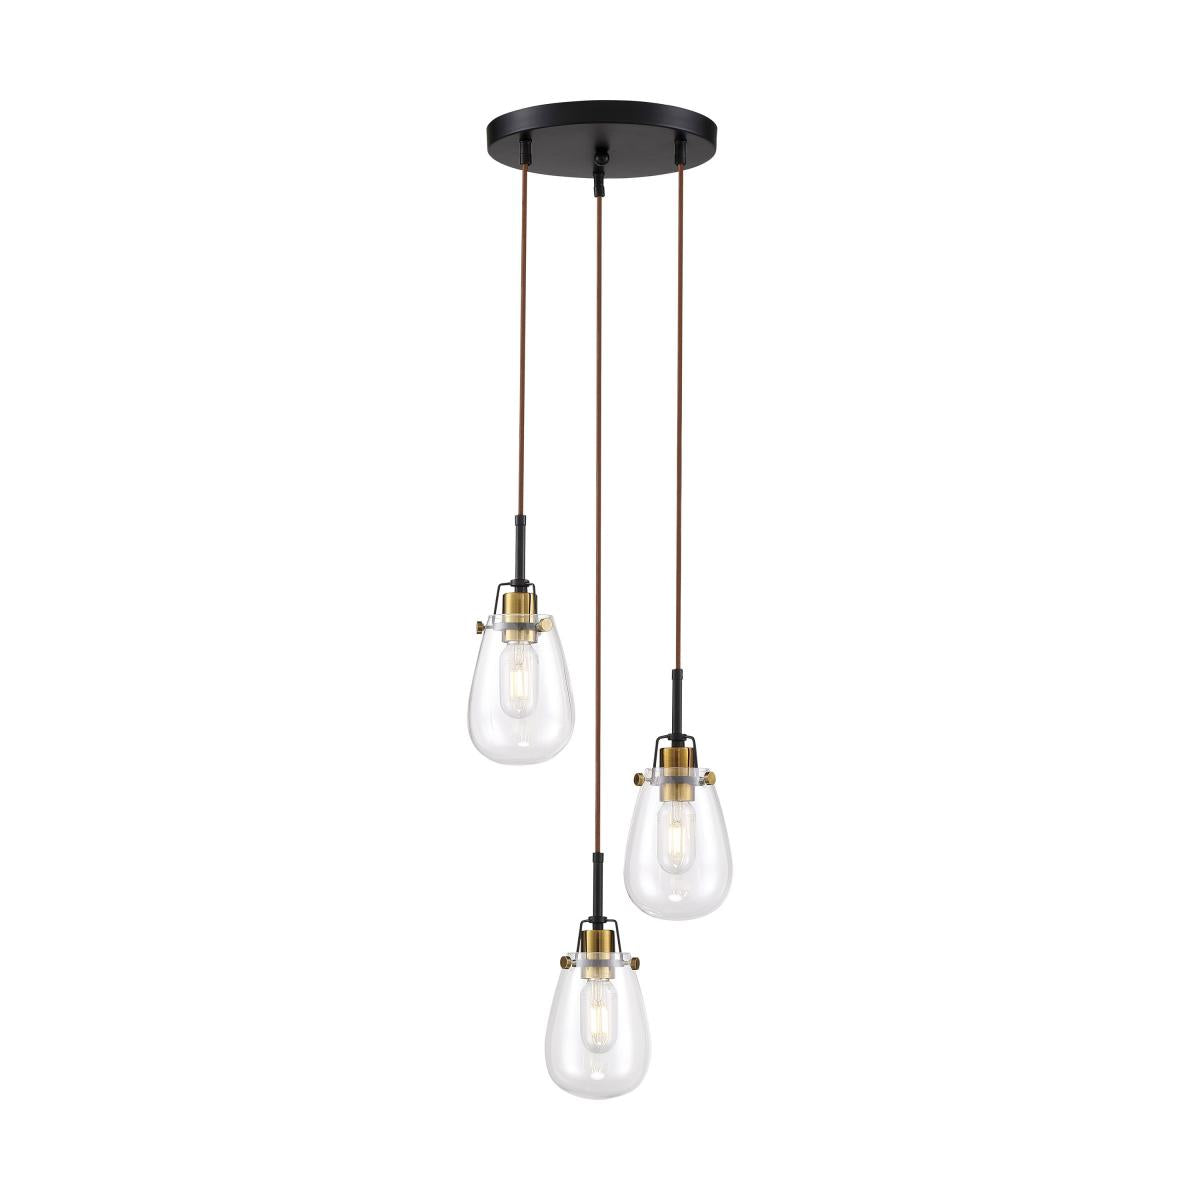 Toleo- 3 Light Pendant with Clear Glass - Black Finish with Vintage Brass Accents